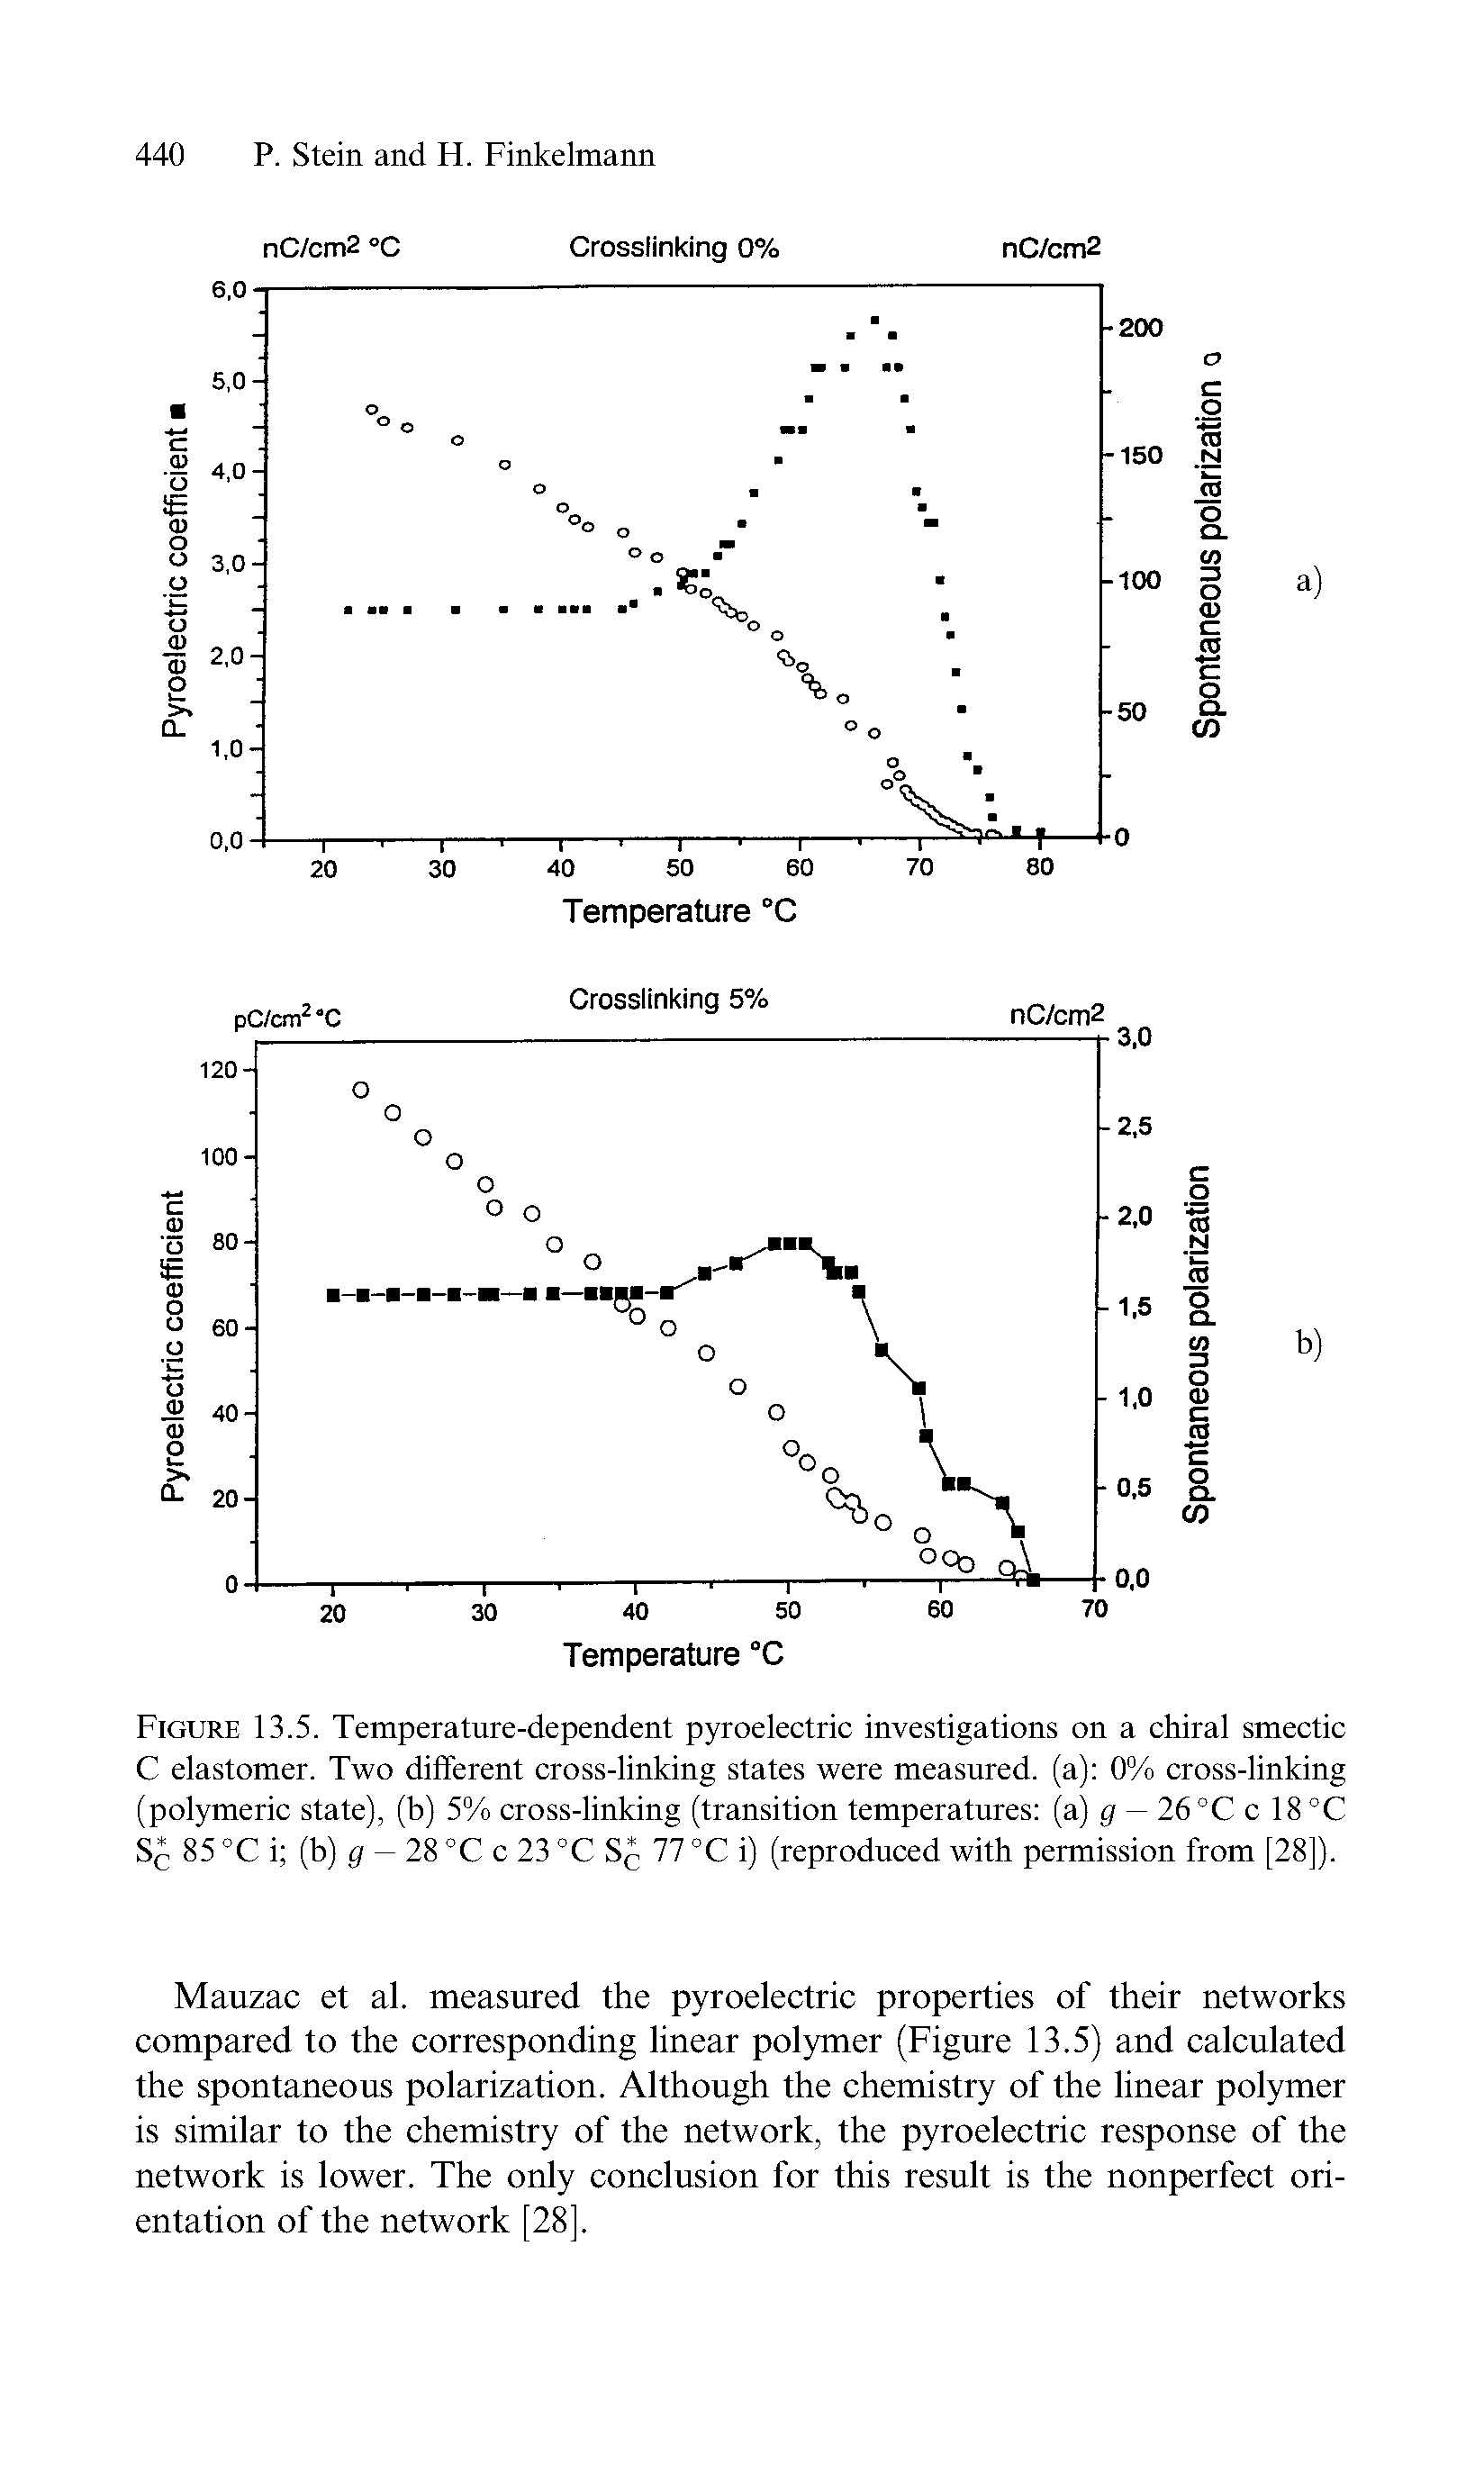 Figure 13.5. Temperature-dependent pyroelectric investigations on a chiral smectic C elastomer. Two different cross-linking states were measured, (a) 0% cross-linking (polymeric state), (b) 5% cross-linking (transition temperatures (a) gi — 26°C c 18 °C Sc 85 °C i (b) gi — 28 °C c 23 °C S)) 77 °C i) (reproduced with permission from [28]).